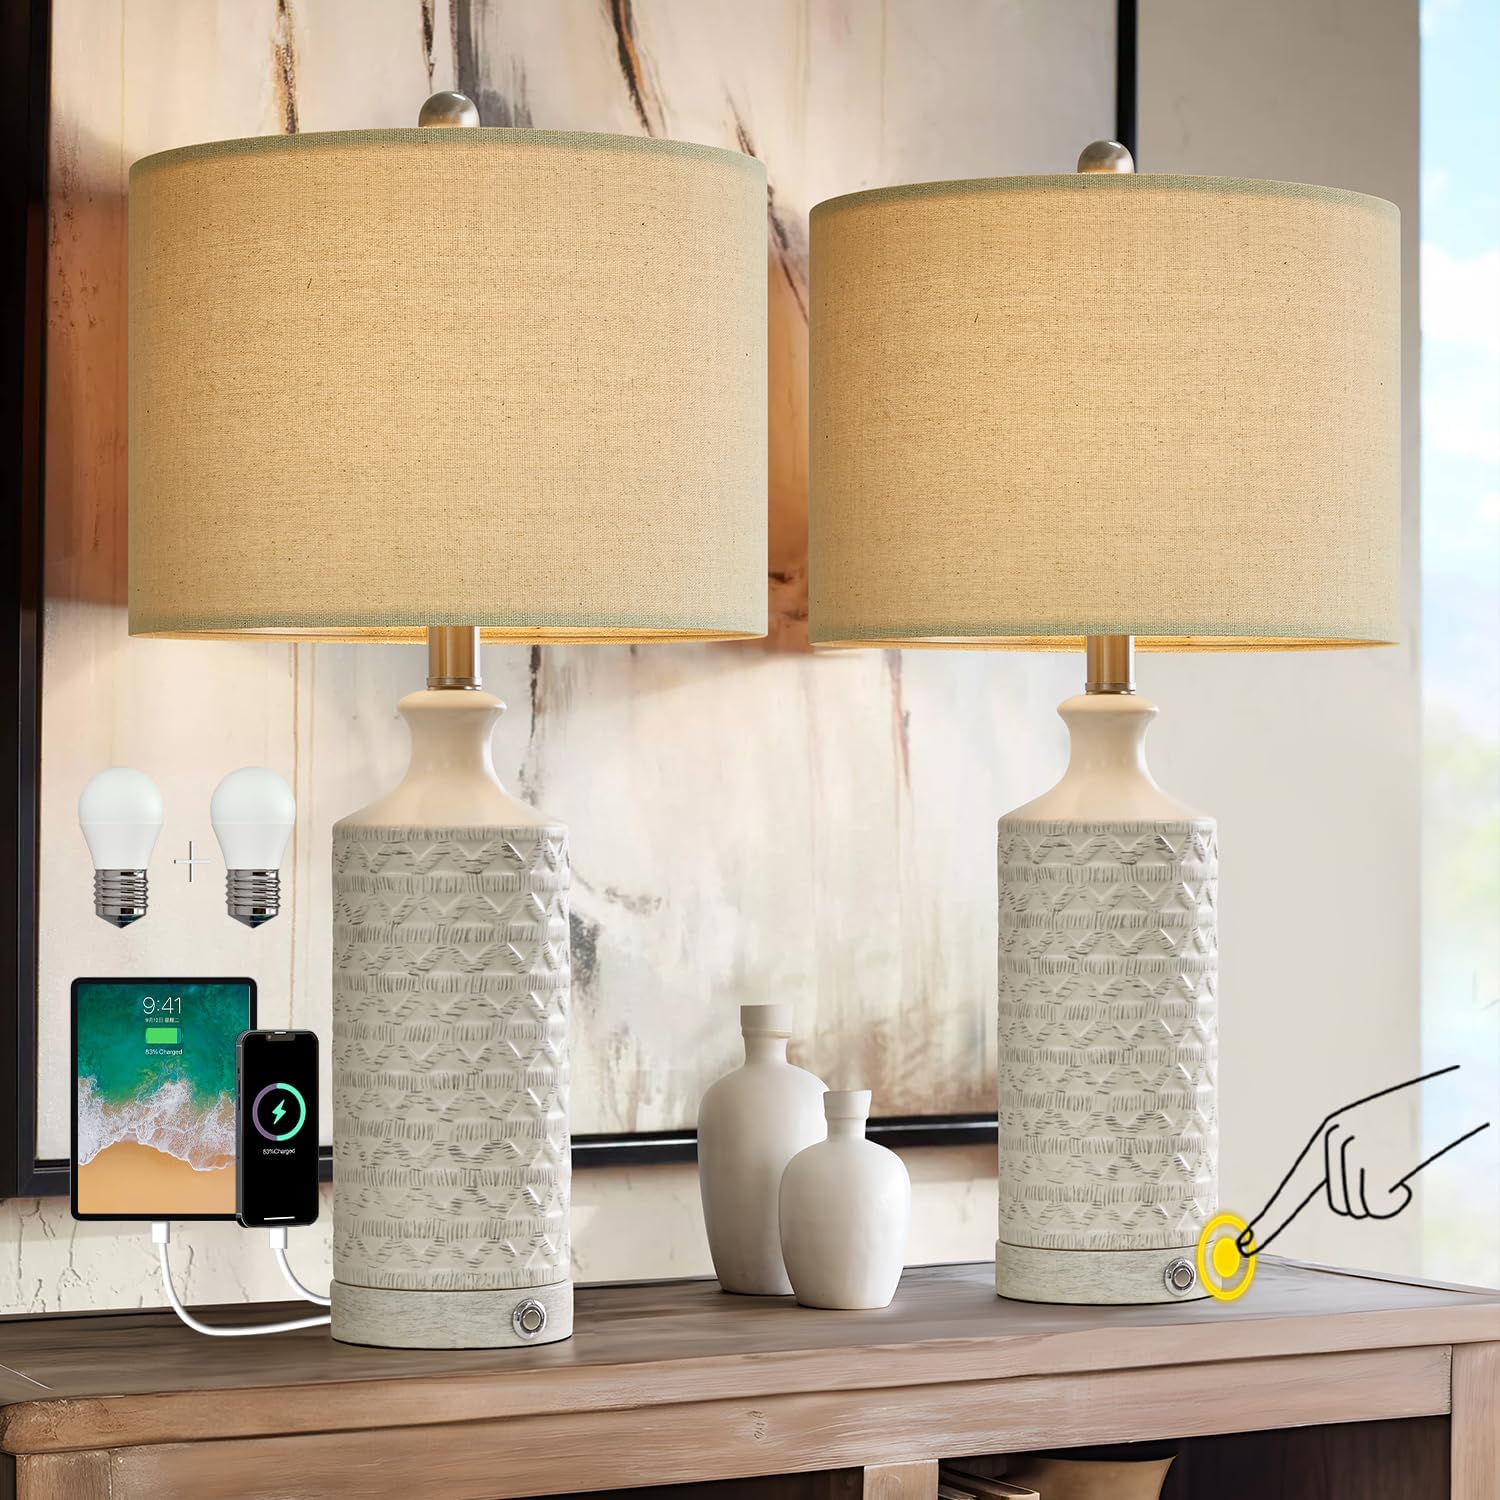 PoKat 24 3 Way Dimmable Touch Table Lamp Sets of 2 Modern Contemporary Ceramic Lamps for Living Room Bedroom White Farmhouse Bedside Nightstand Lamp with 2 USB Ports Bulb Included